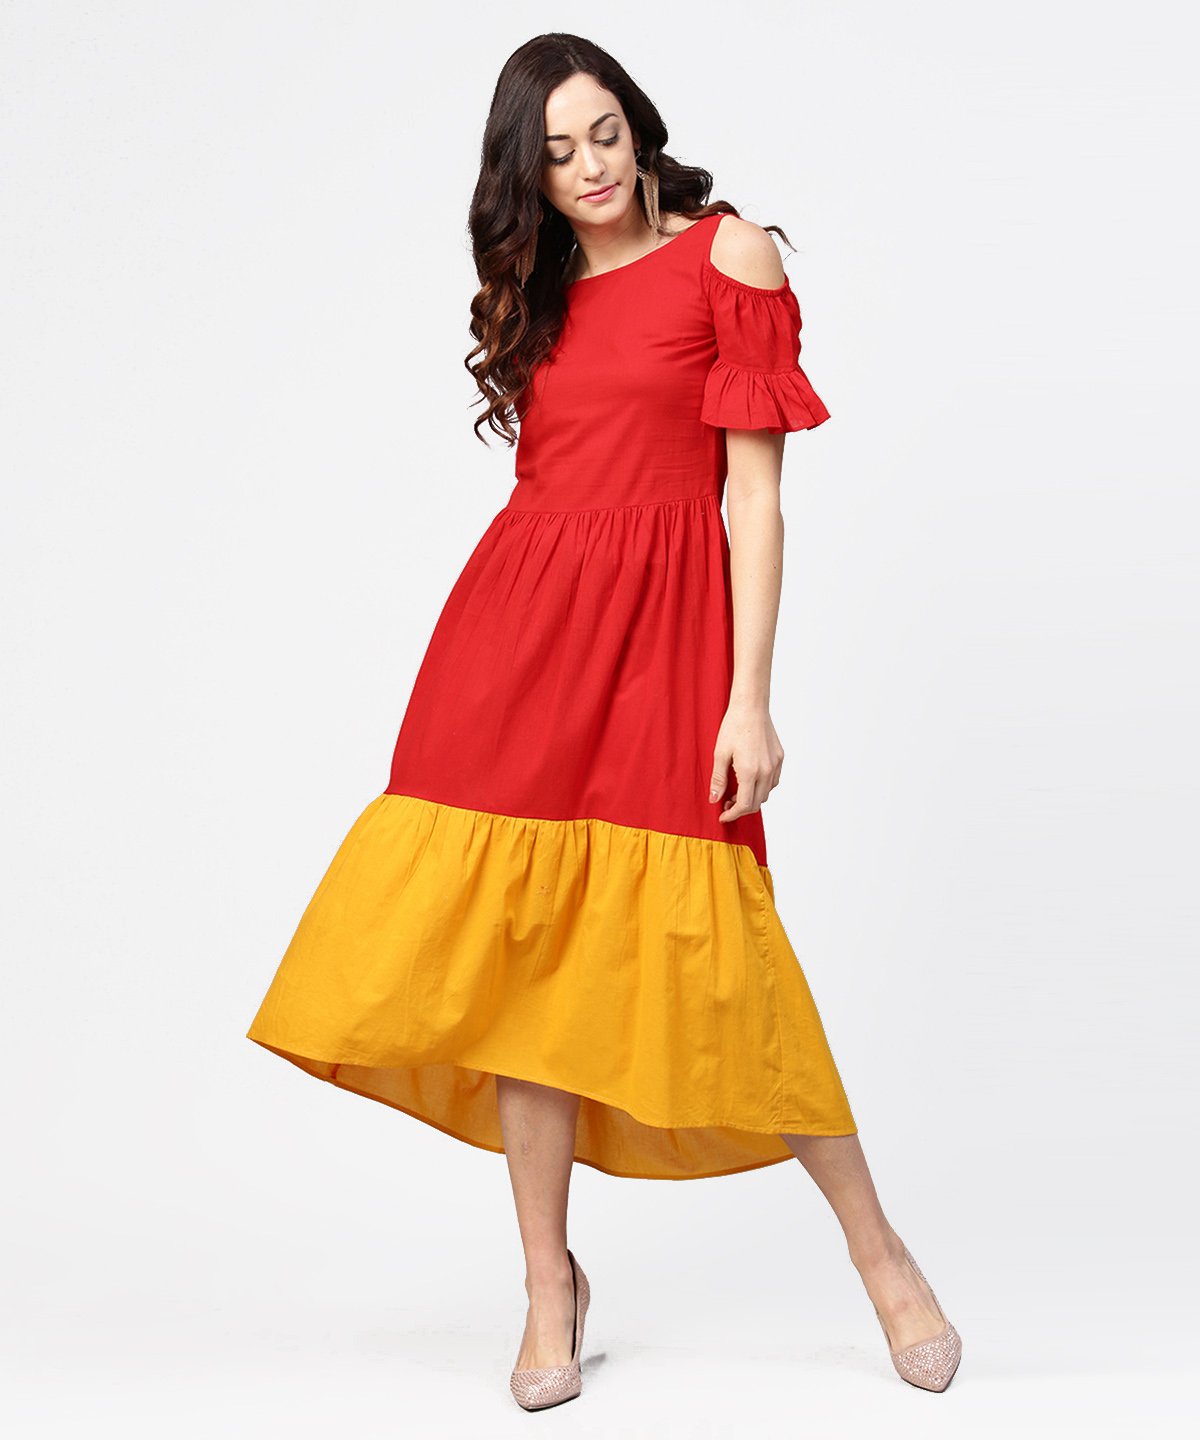 Women's Red & Yellow Short Cold Shoulder Cotton Maxi Dress - Nayo Clothing